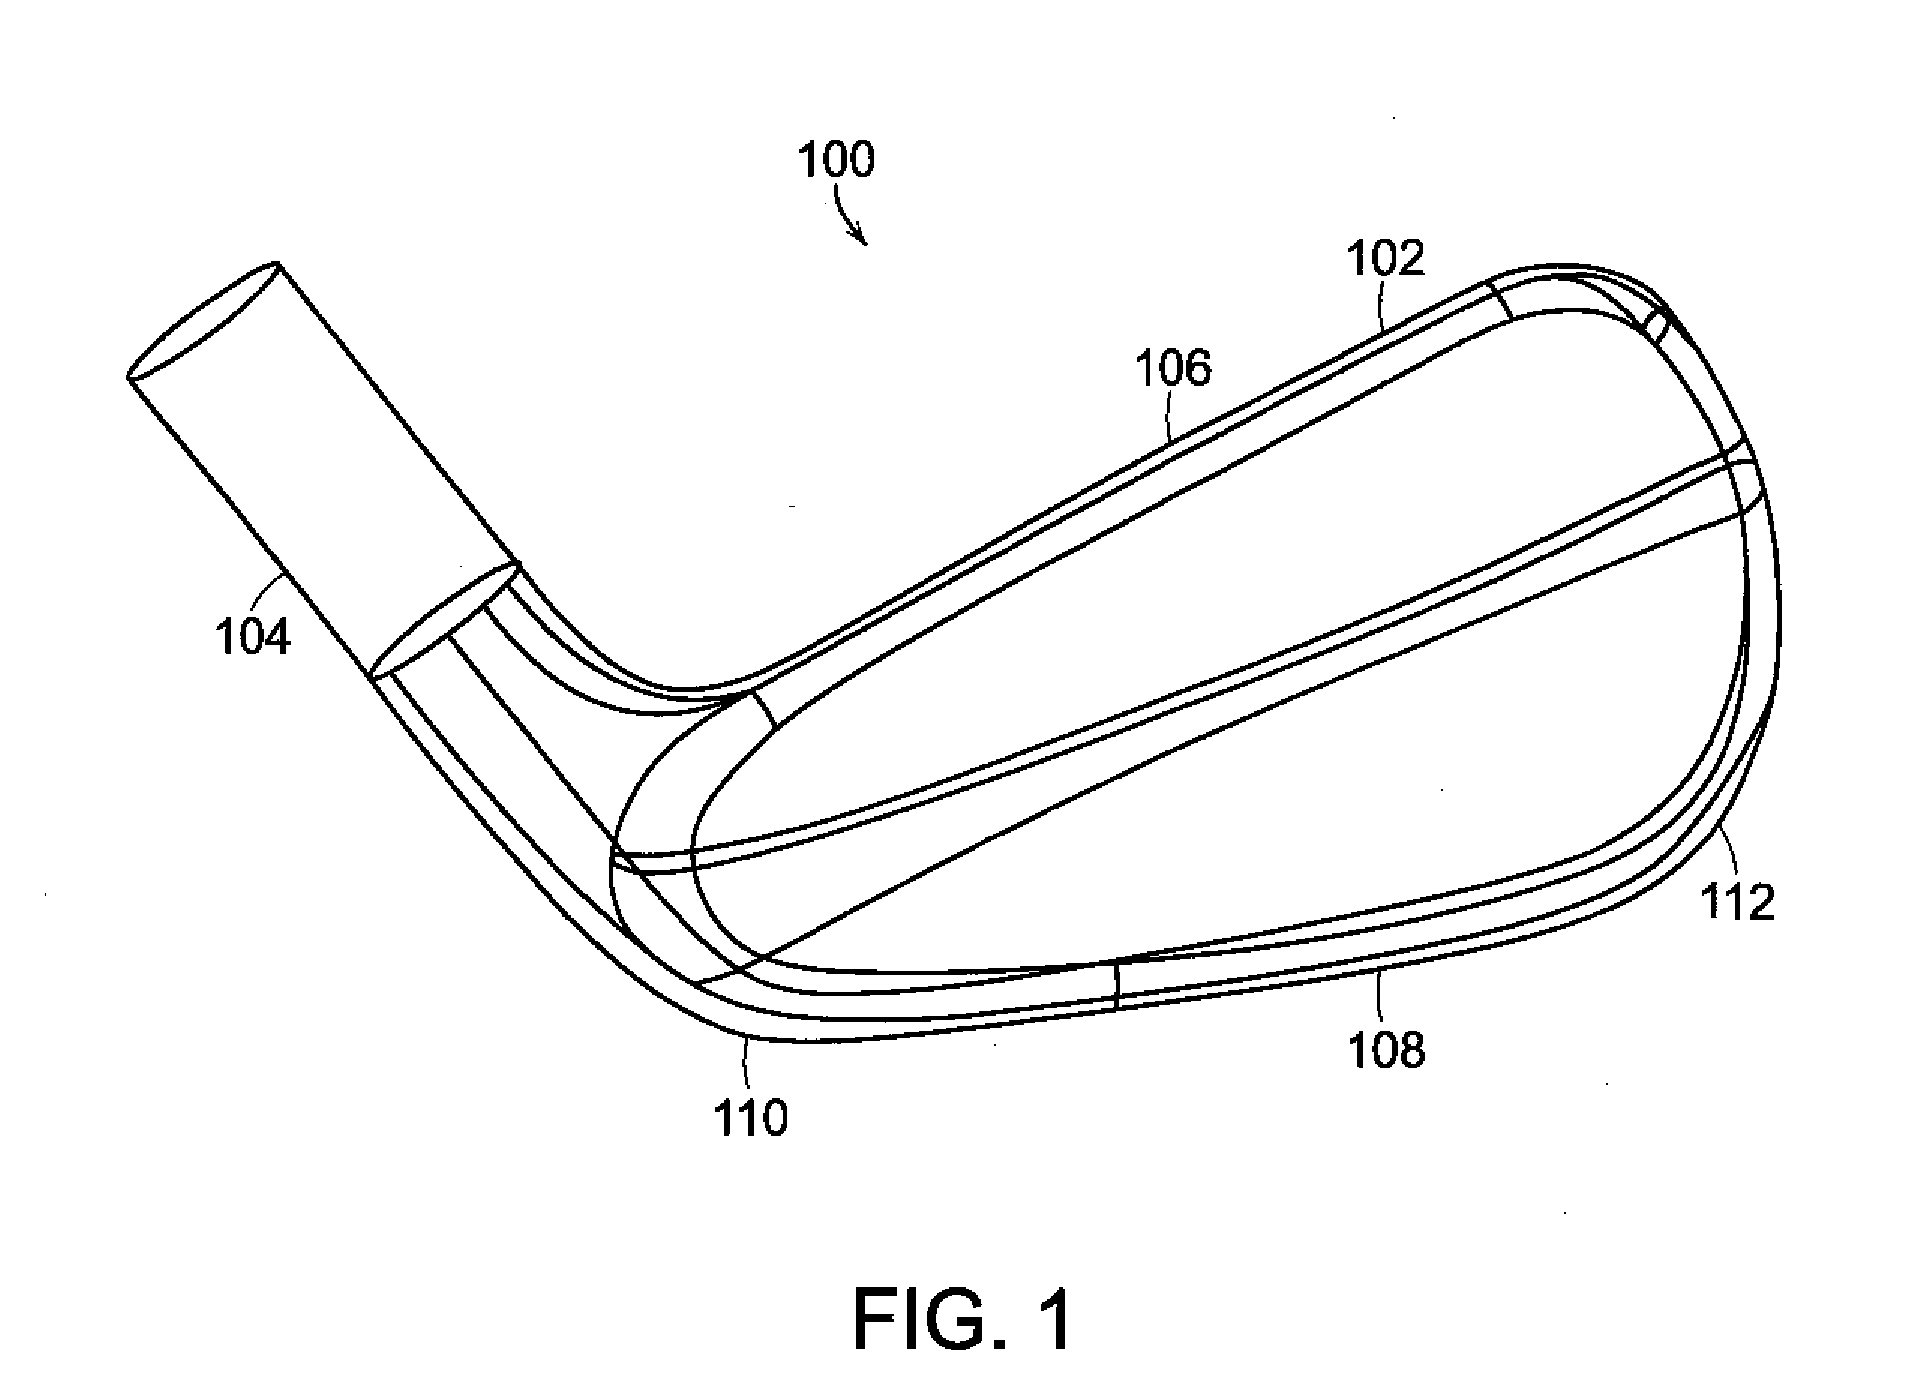 Co-forged golf club head and method of manufacture